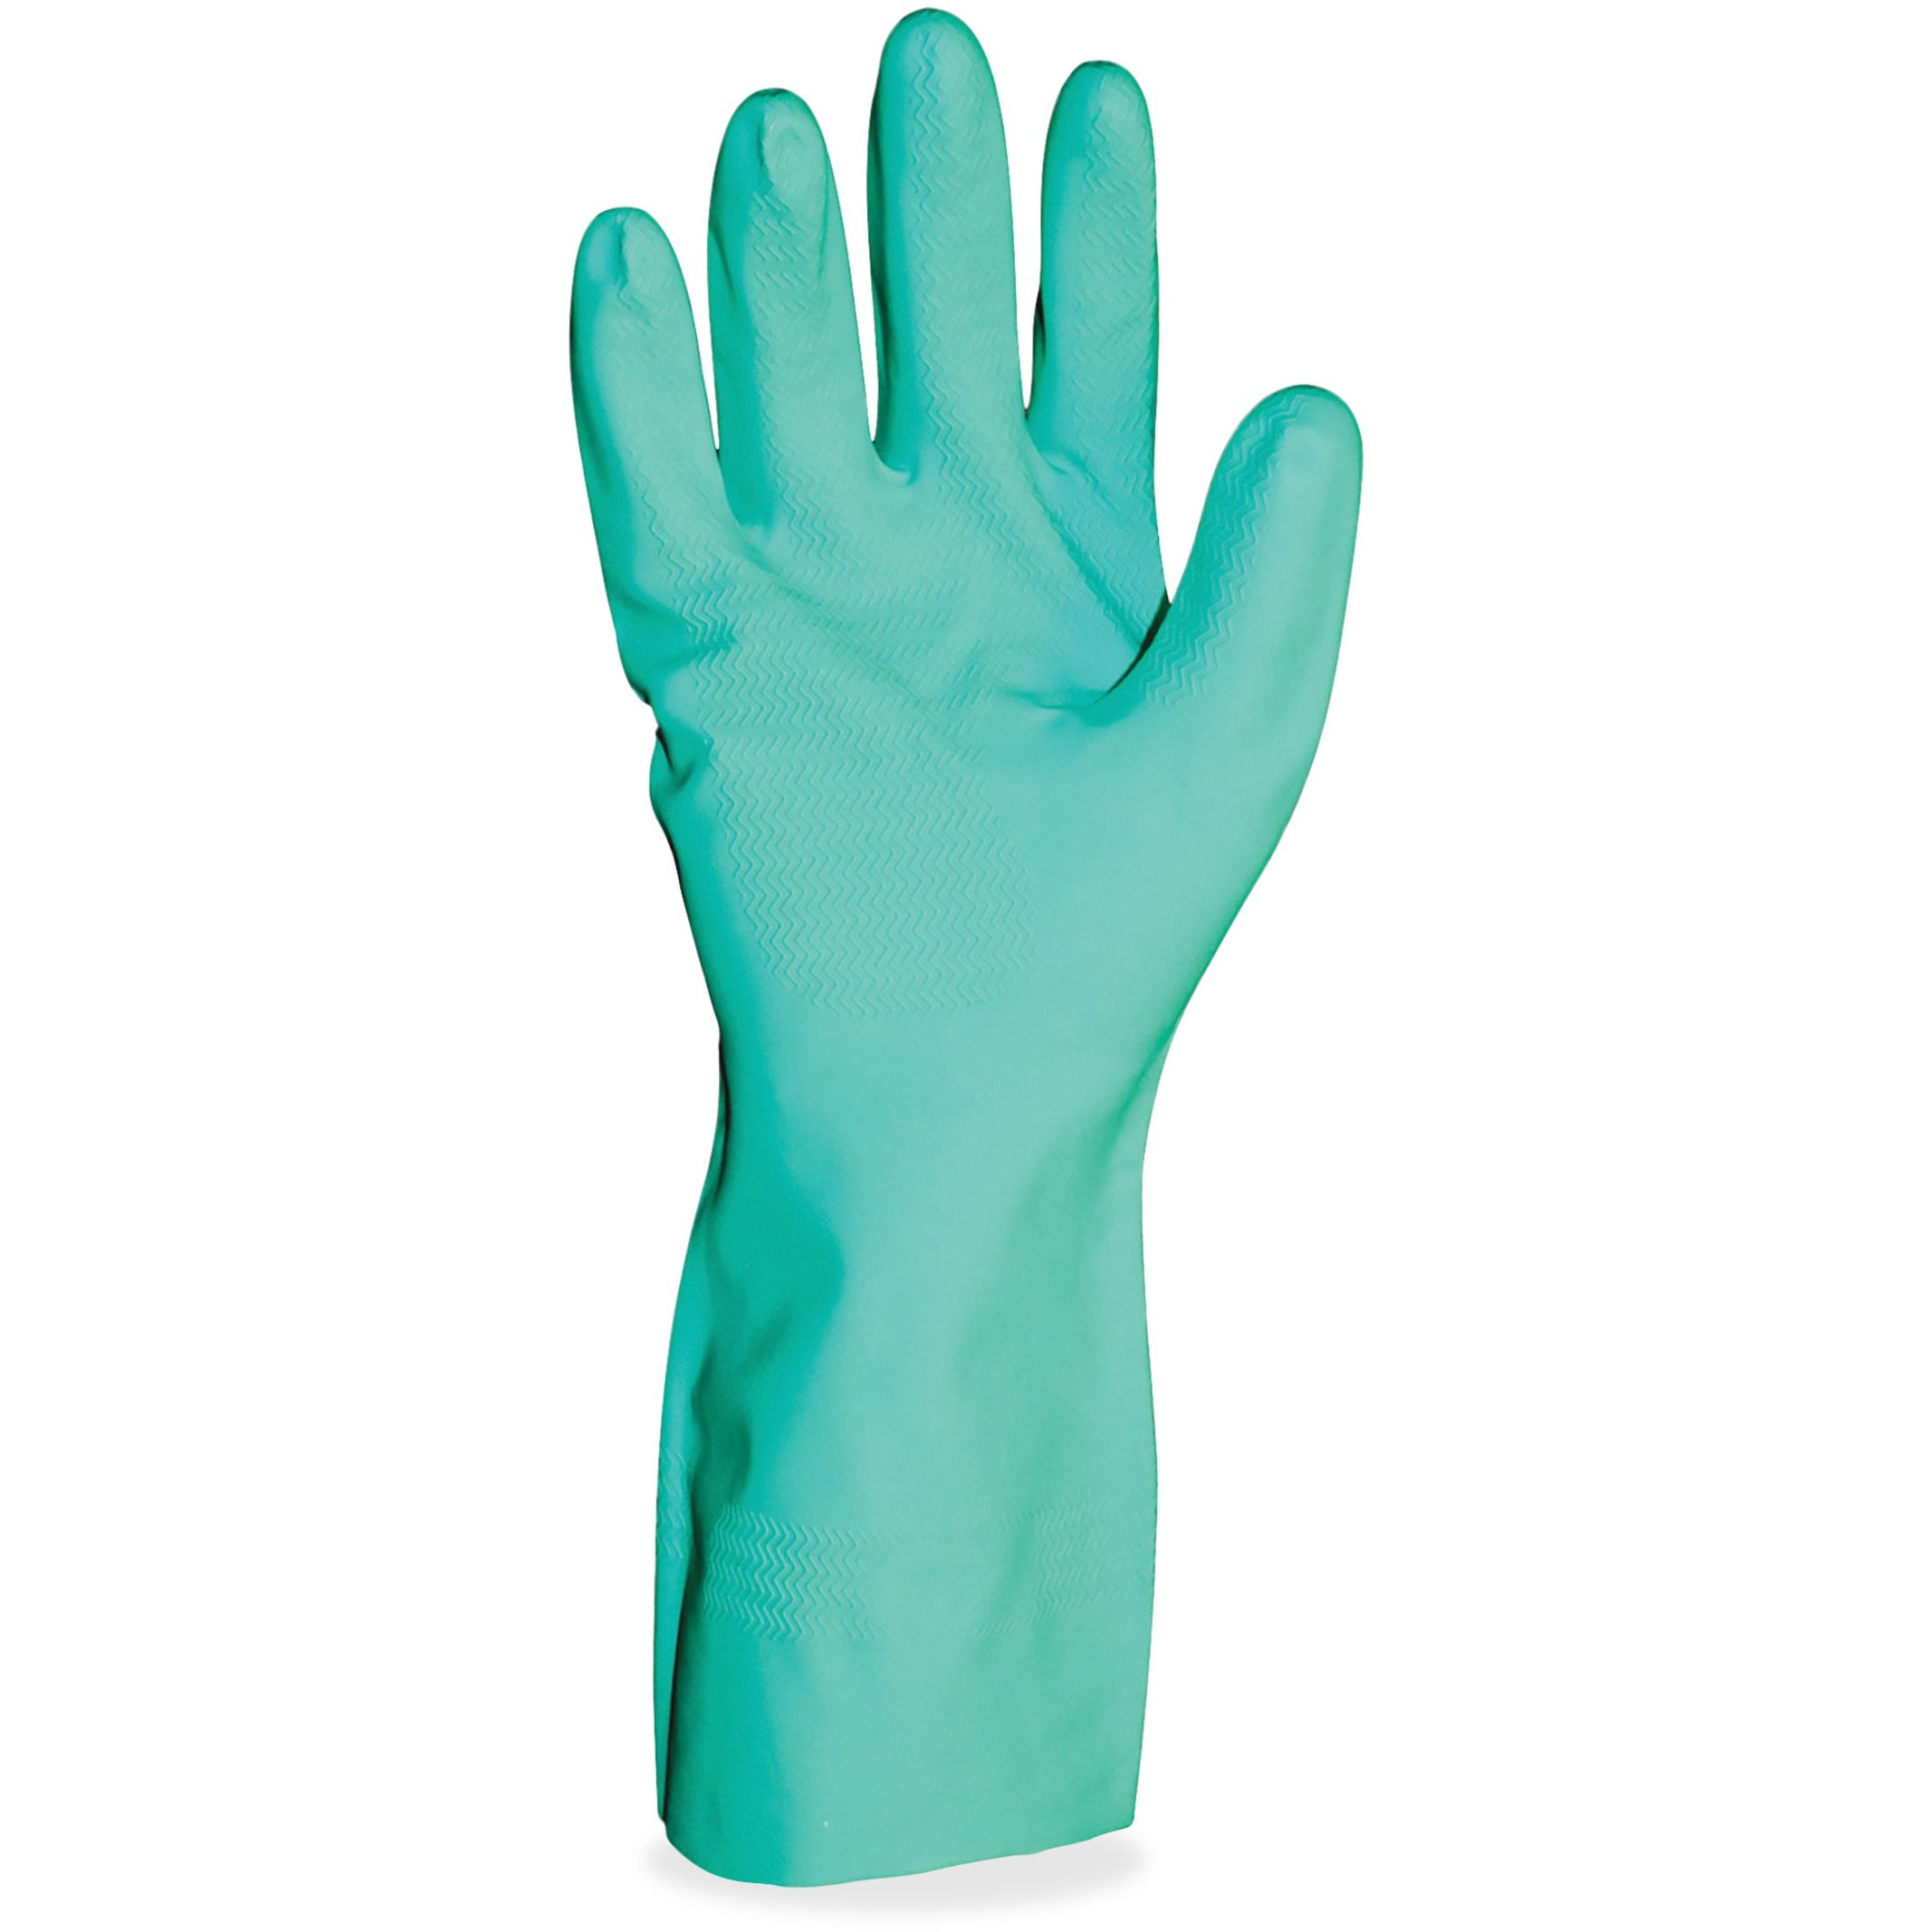 SHOWA 730 CHEMICAL RESISTANT NITRILE GLOVES FLOCK LINED SIZE X-SMALL 1 DOZEN 